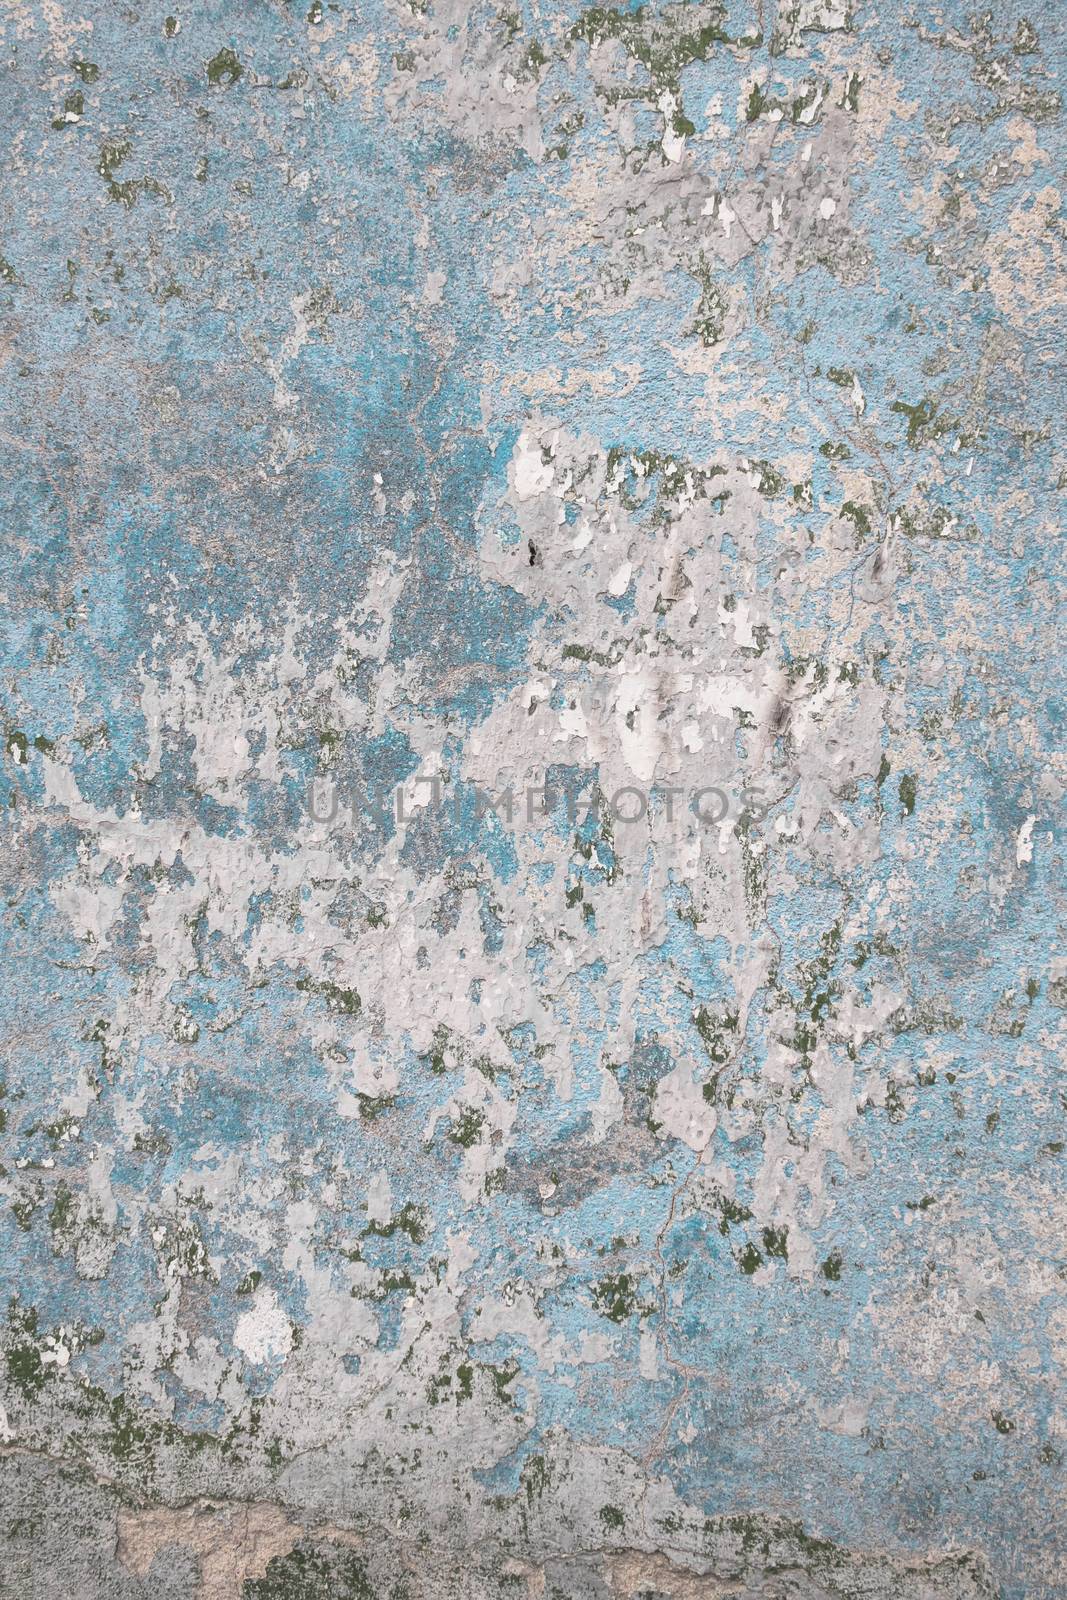 Old concrete wall in grunge style. It can be used as backgrounds and textures.